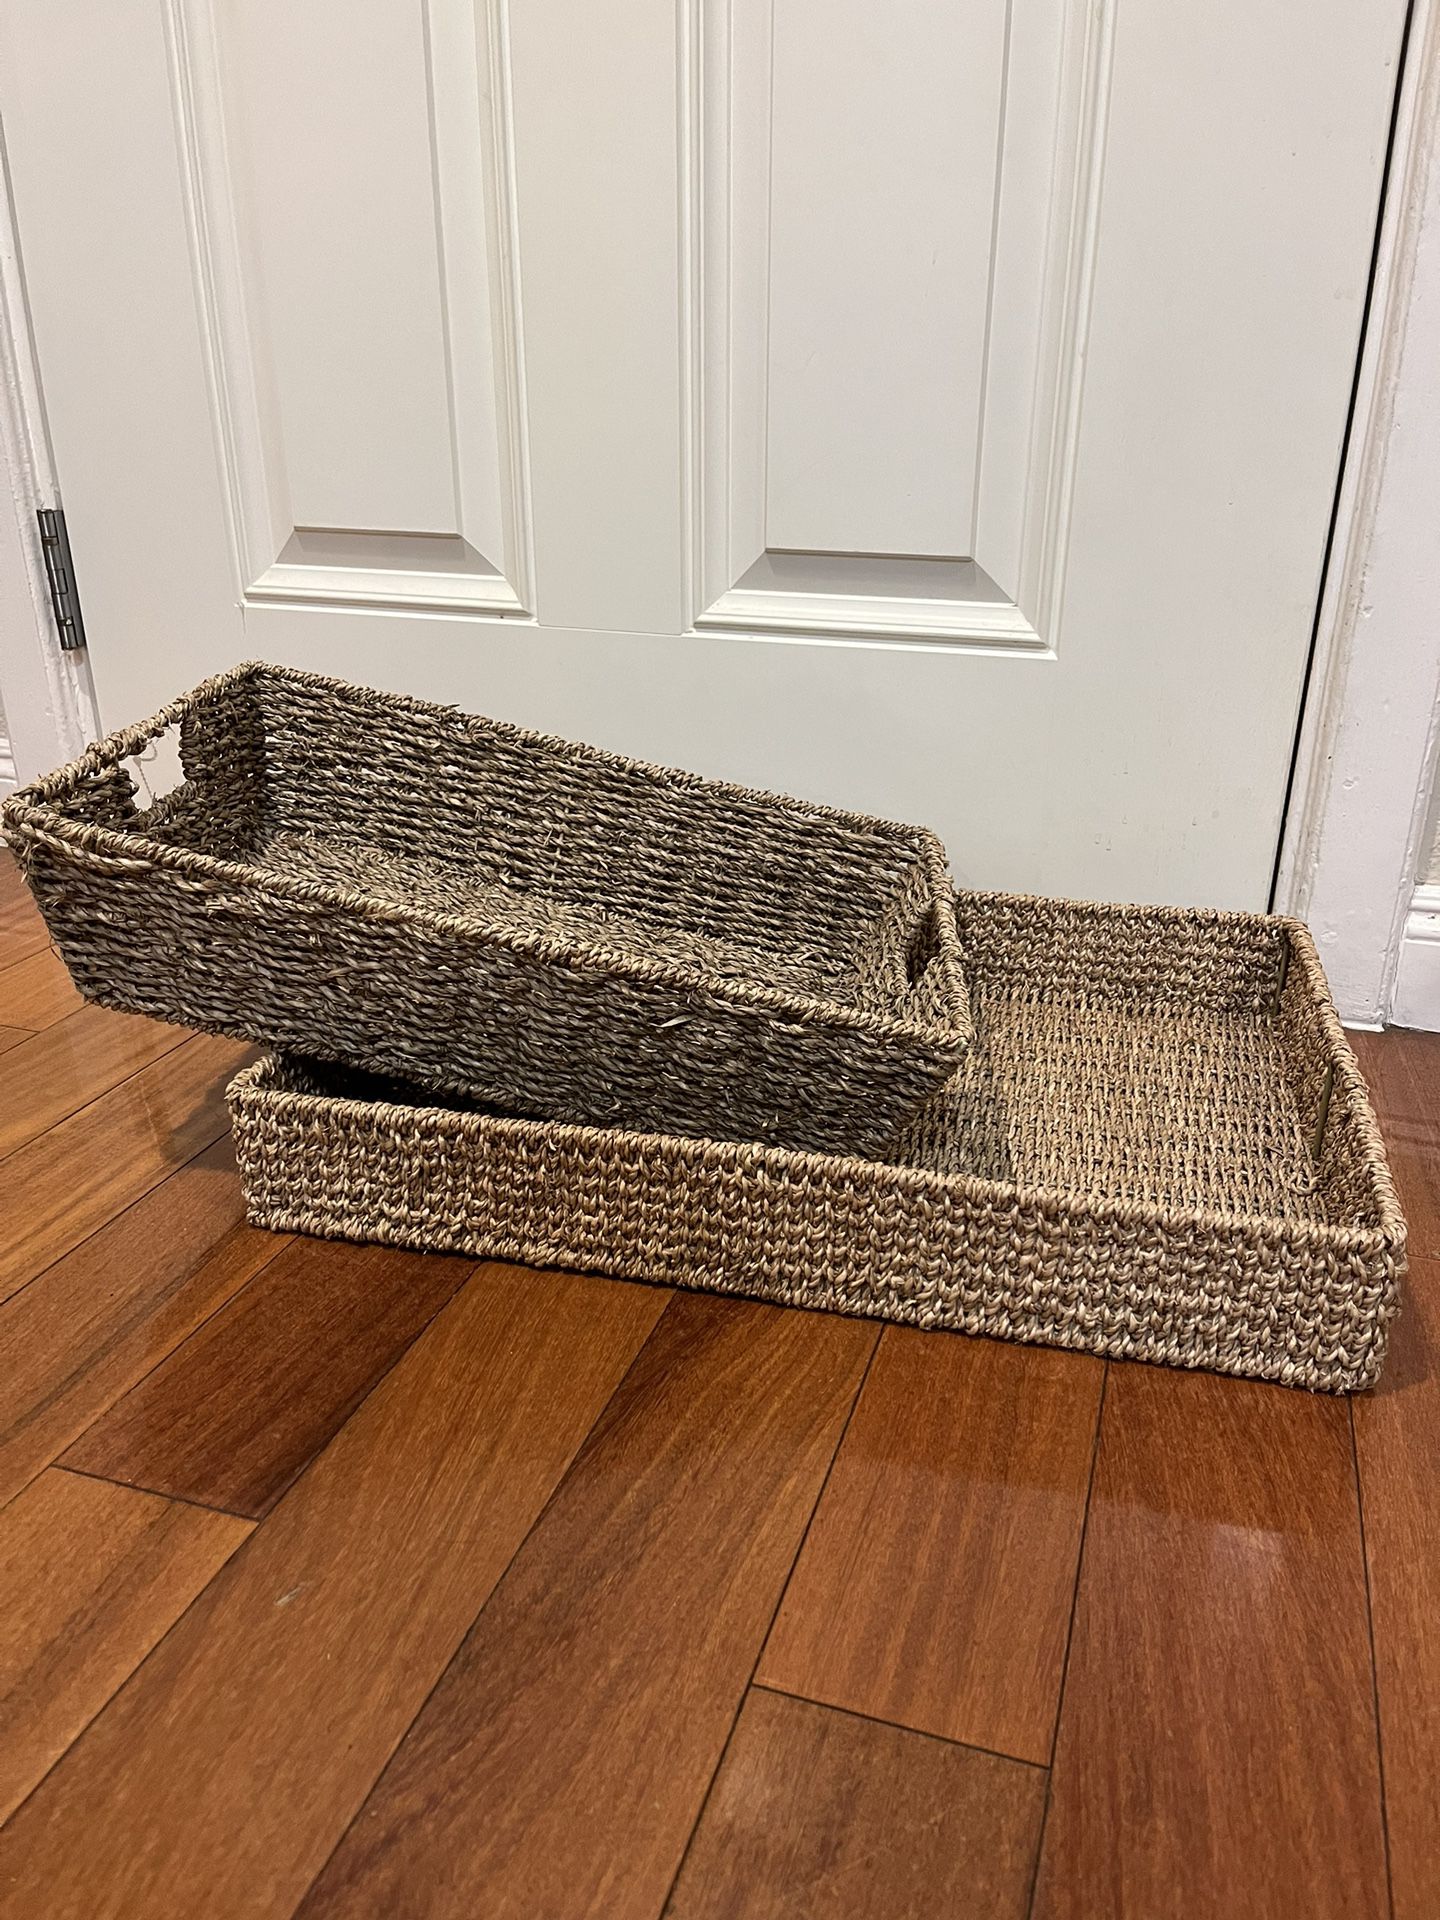 Two Basket Trays Bins Containers Storage 